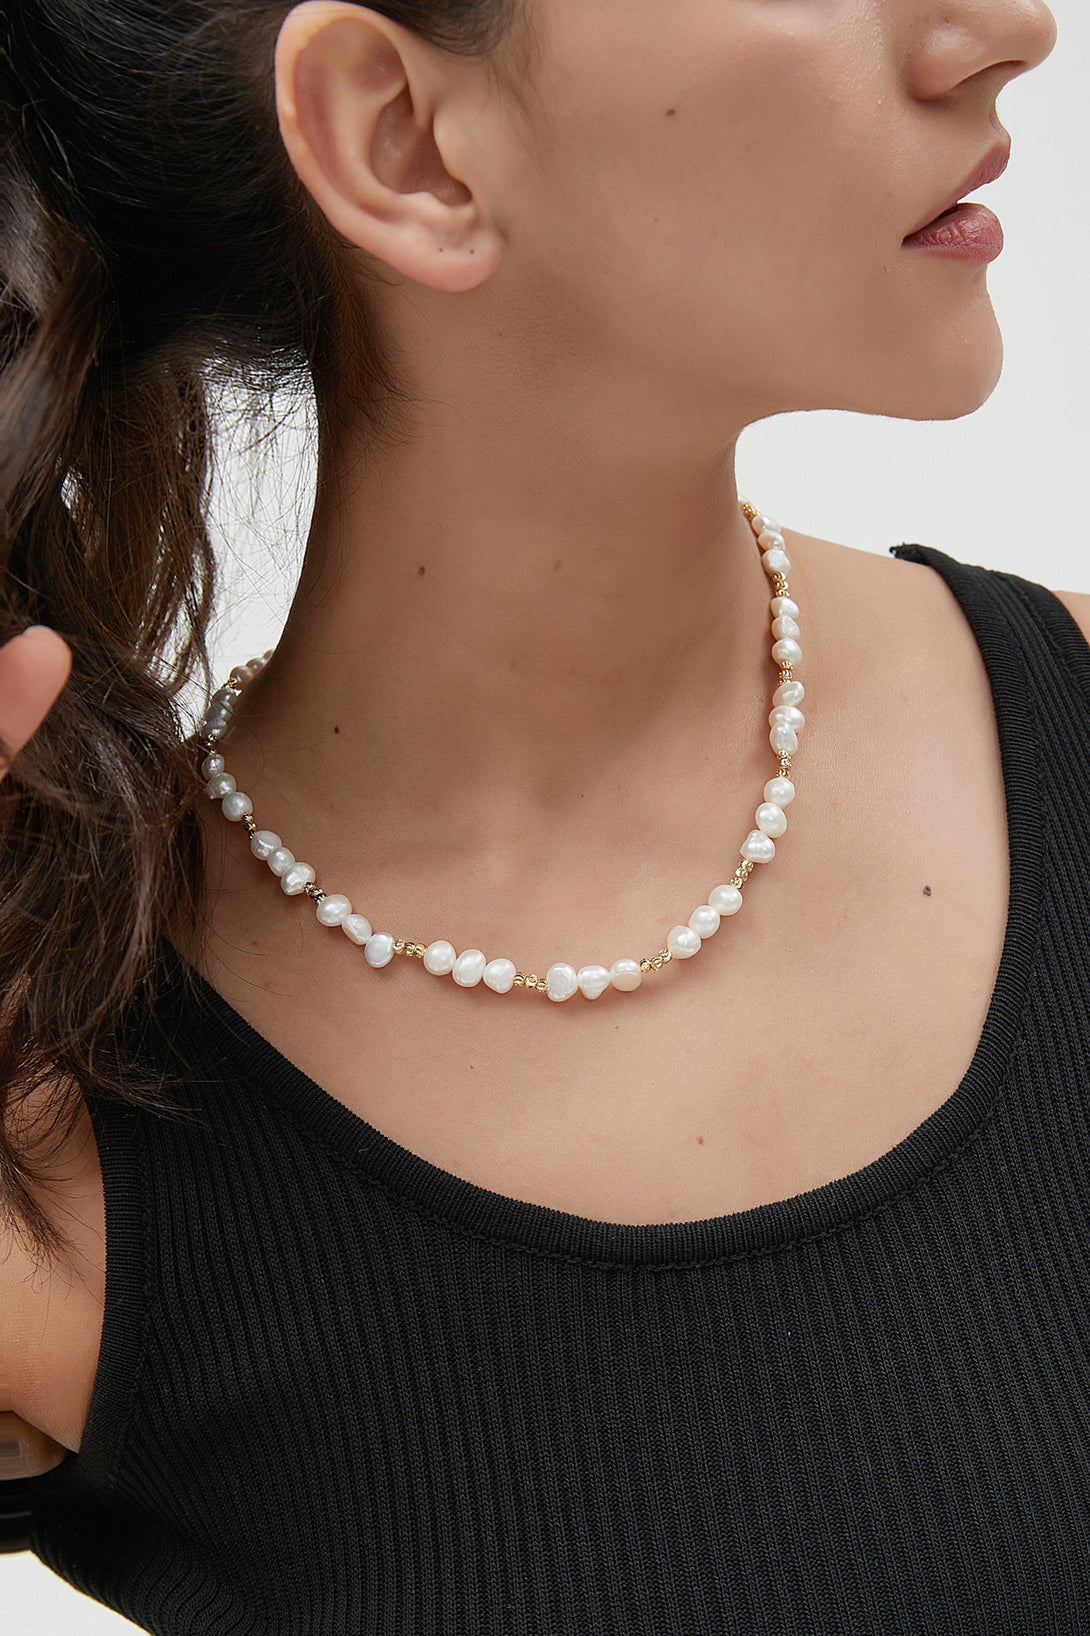 Mera Baroque Pearl and Diamond Cut Beads Necklace - Classicharms